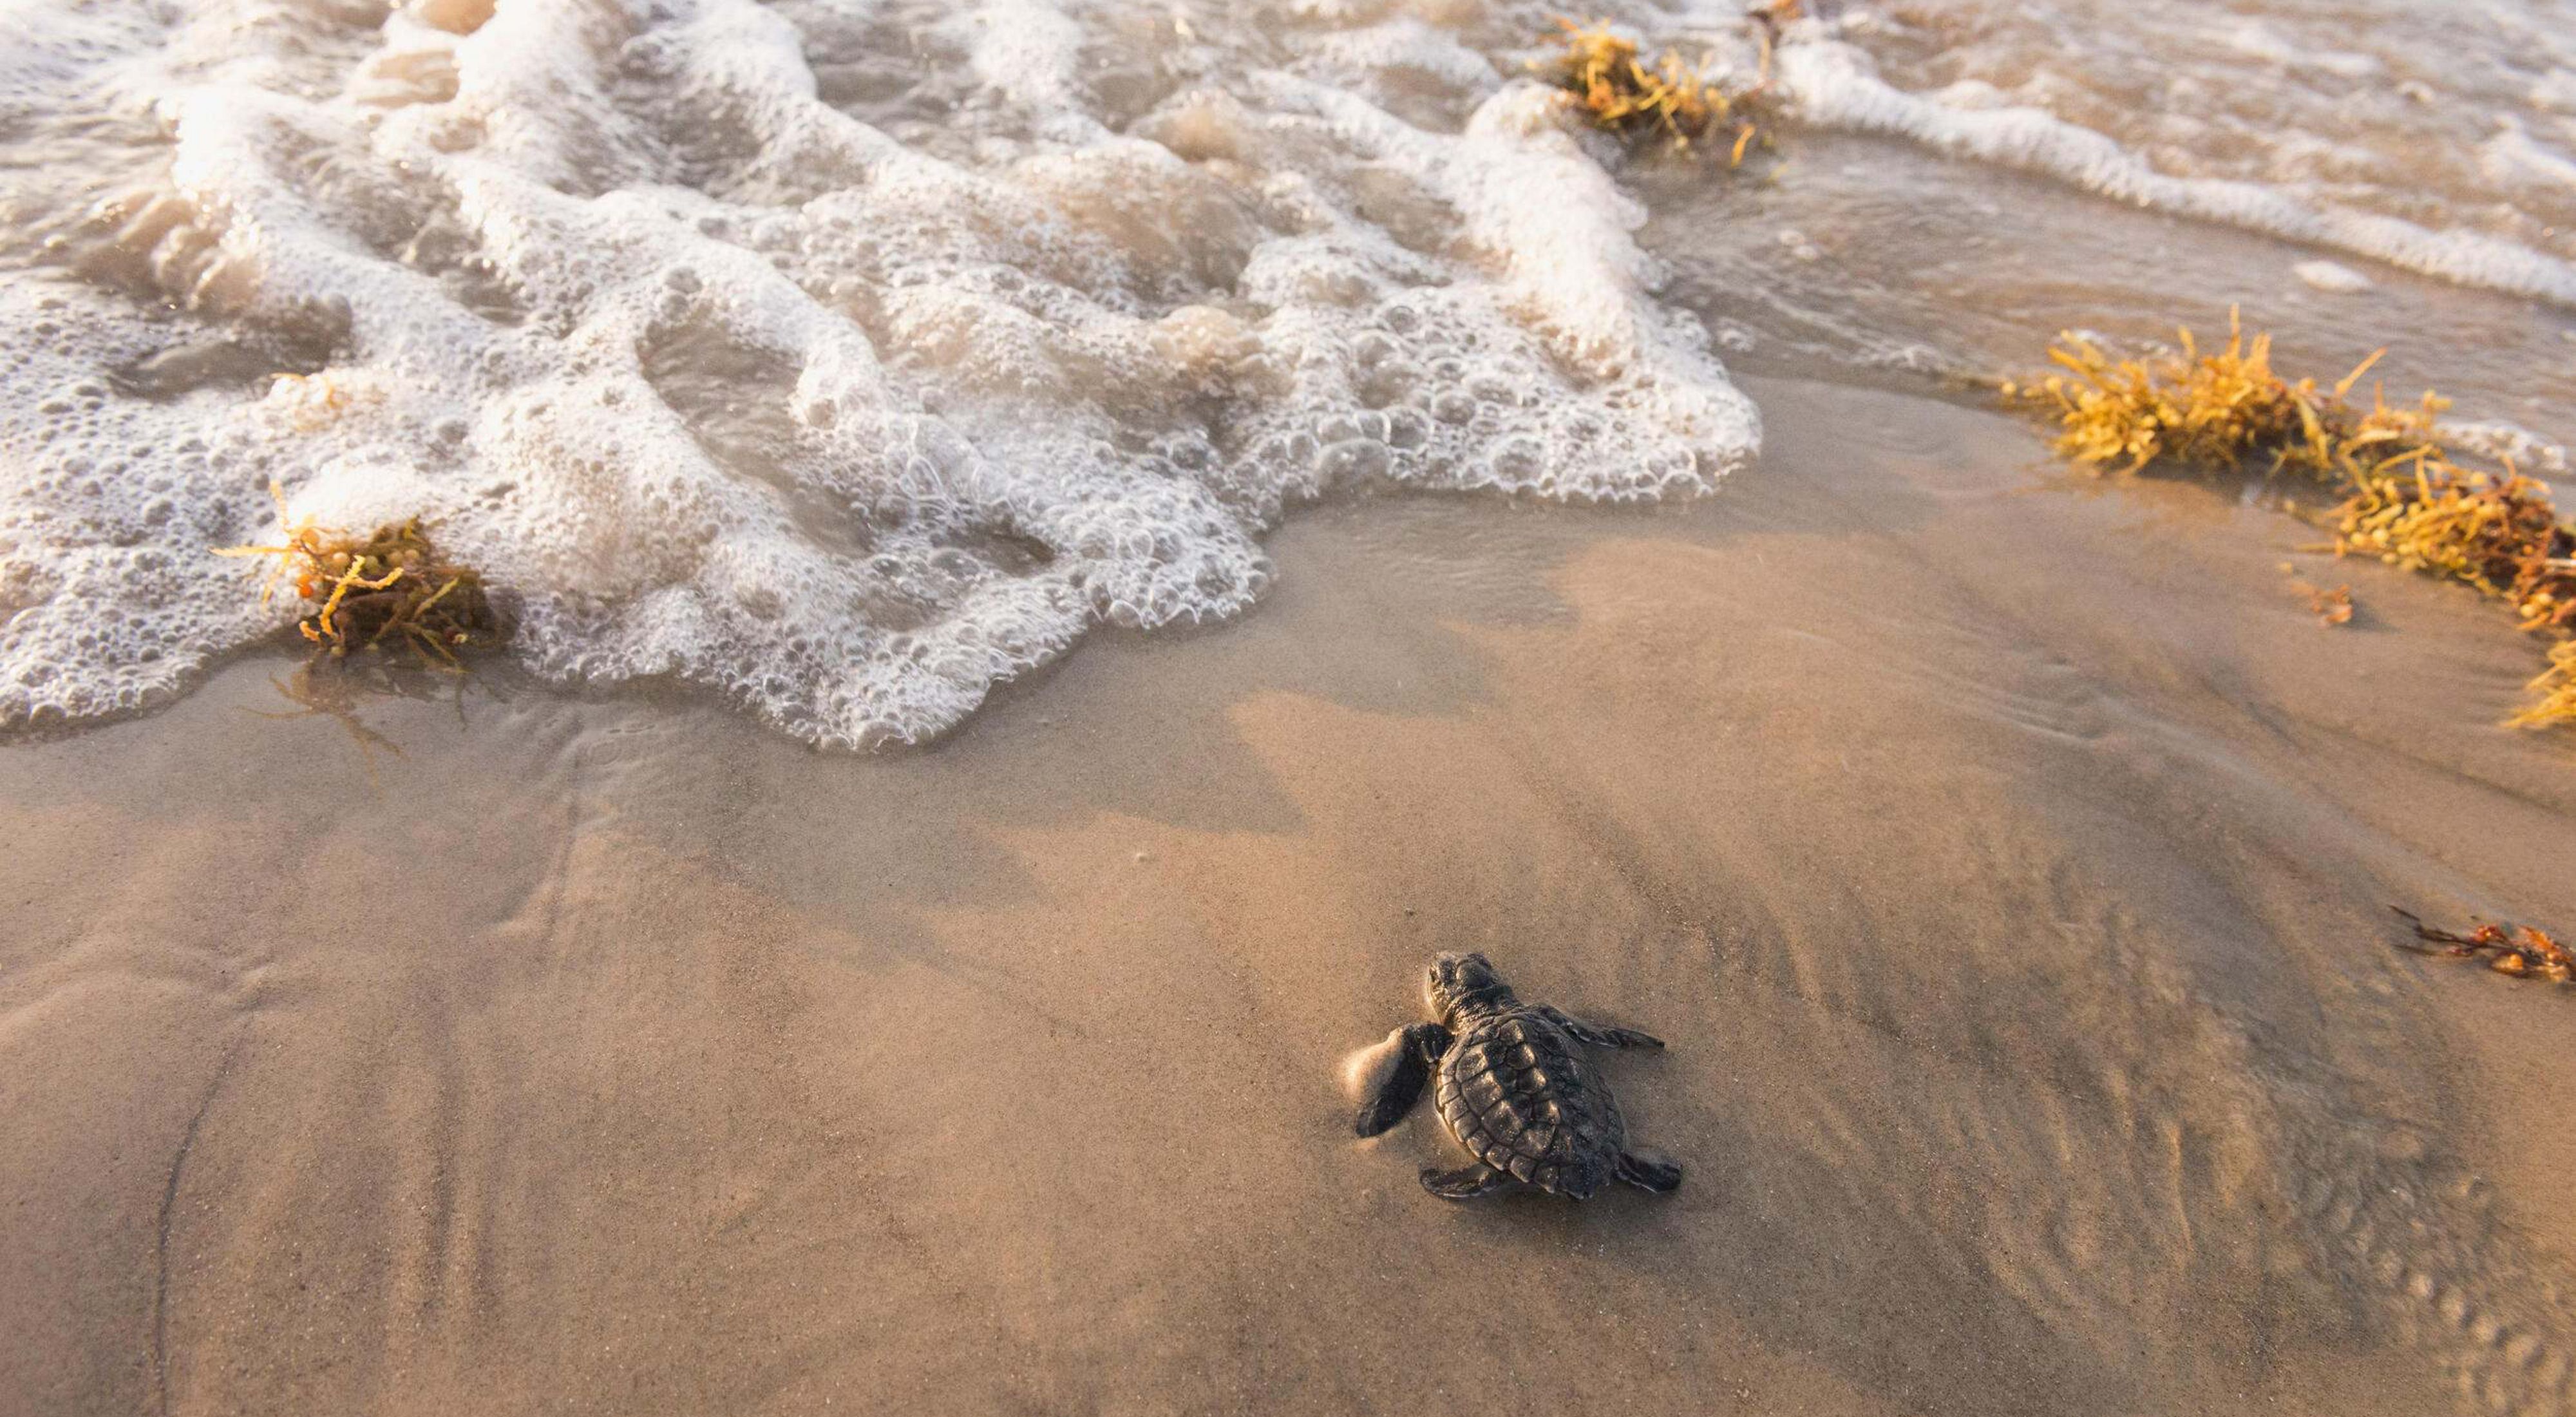 A small turtle moves across sand towards water.